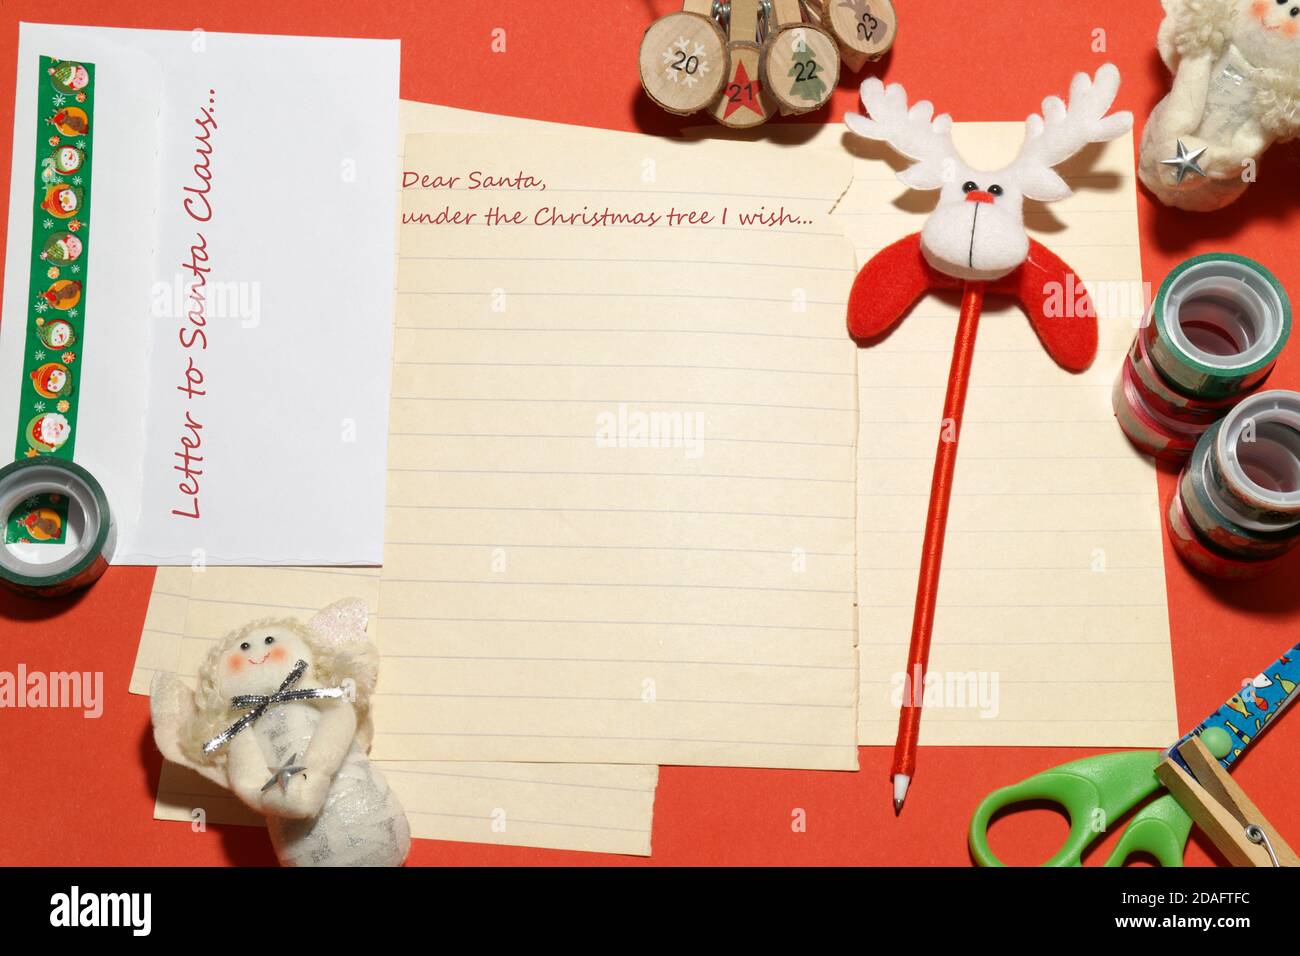 Christmas greeting card or letter to Santa Claus, with some decorations, pen and envelope on the red background. Maybe your wish will come true... Stock Photo